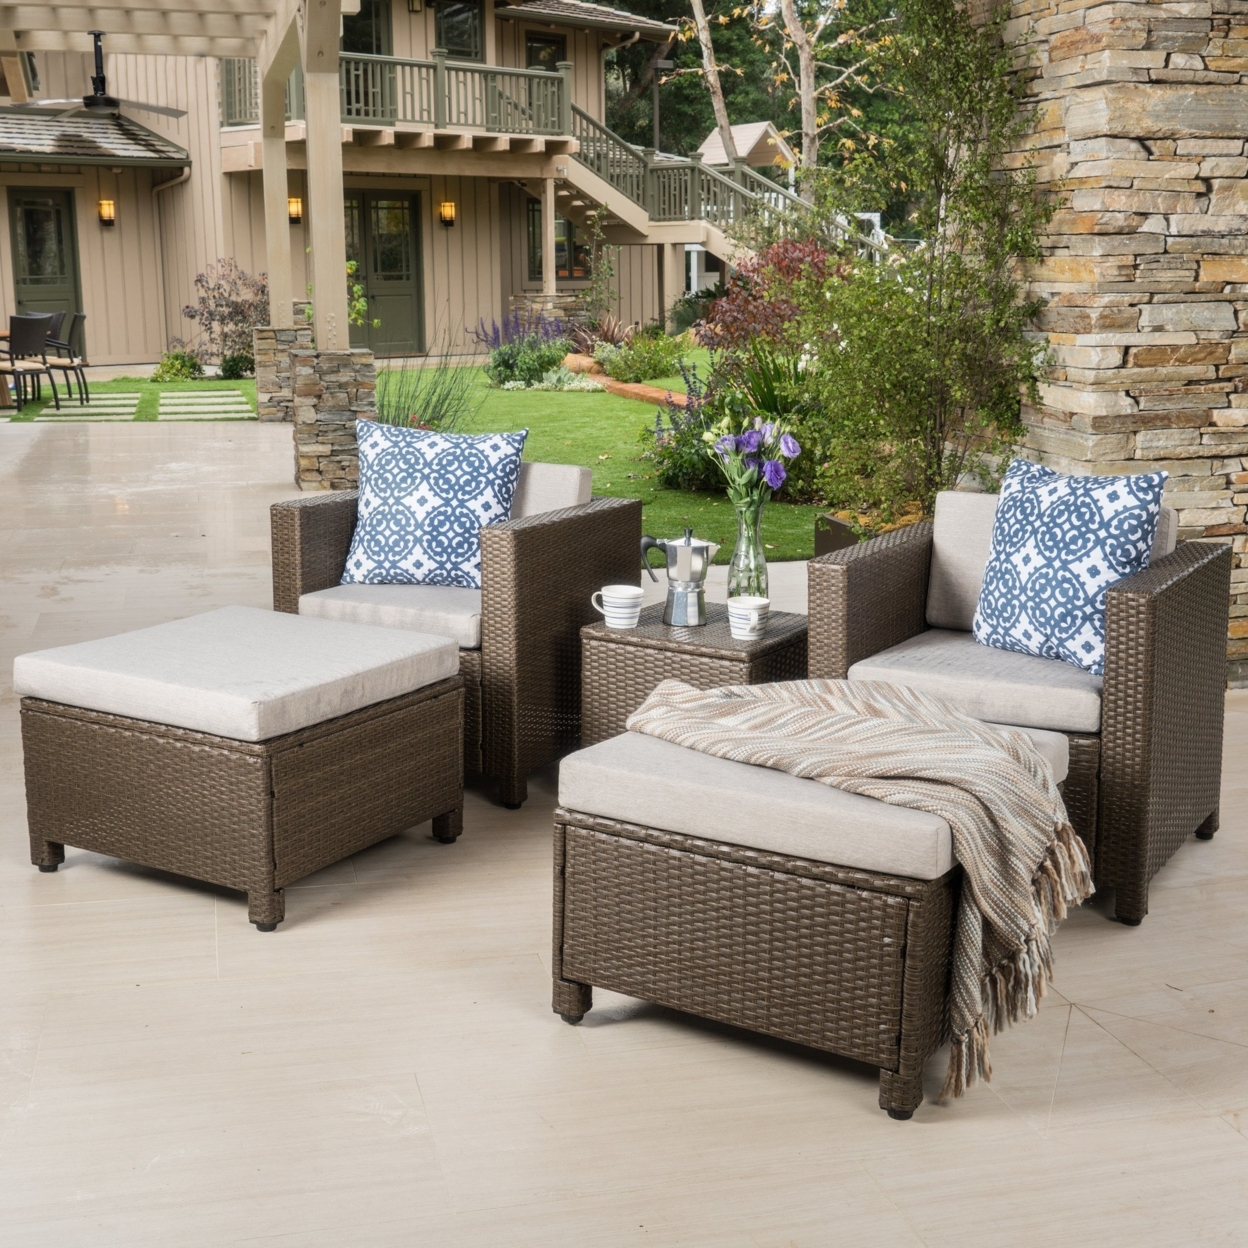 Budva Outdoor 5pc Chat Set With Cushions - Dark Brown Wicker